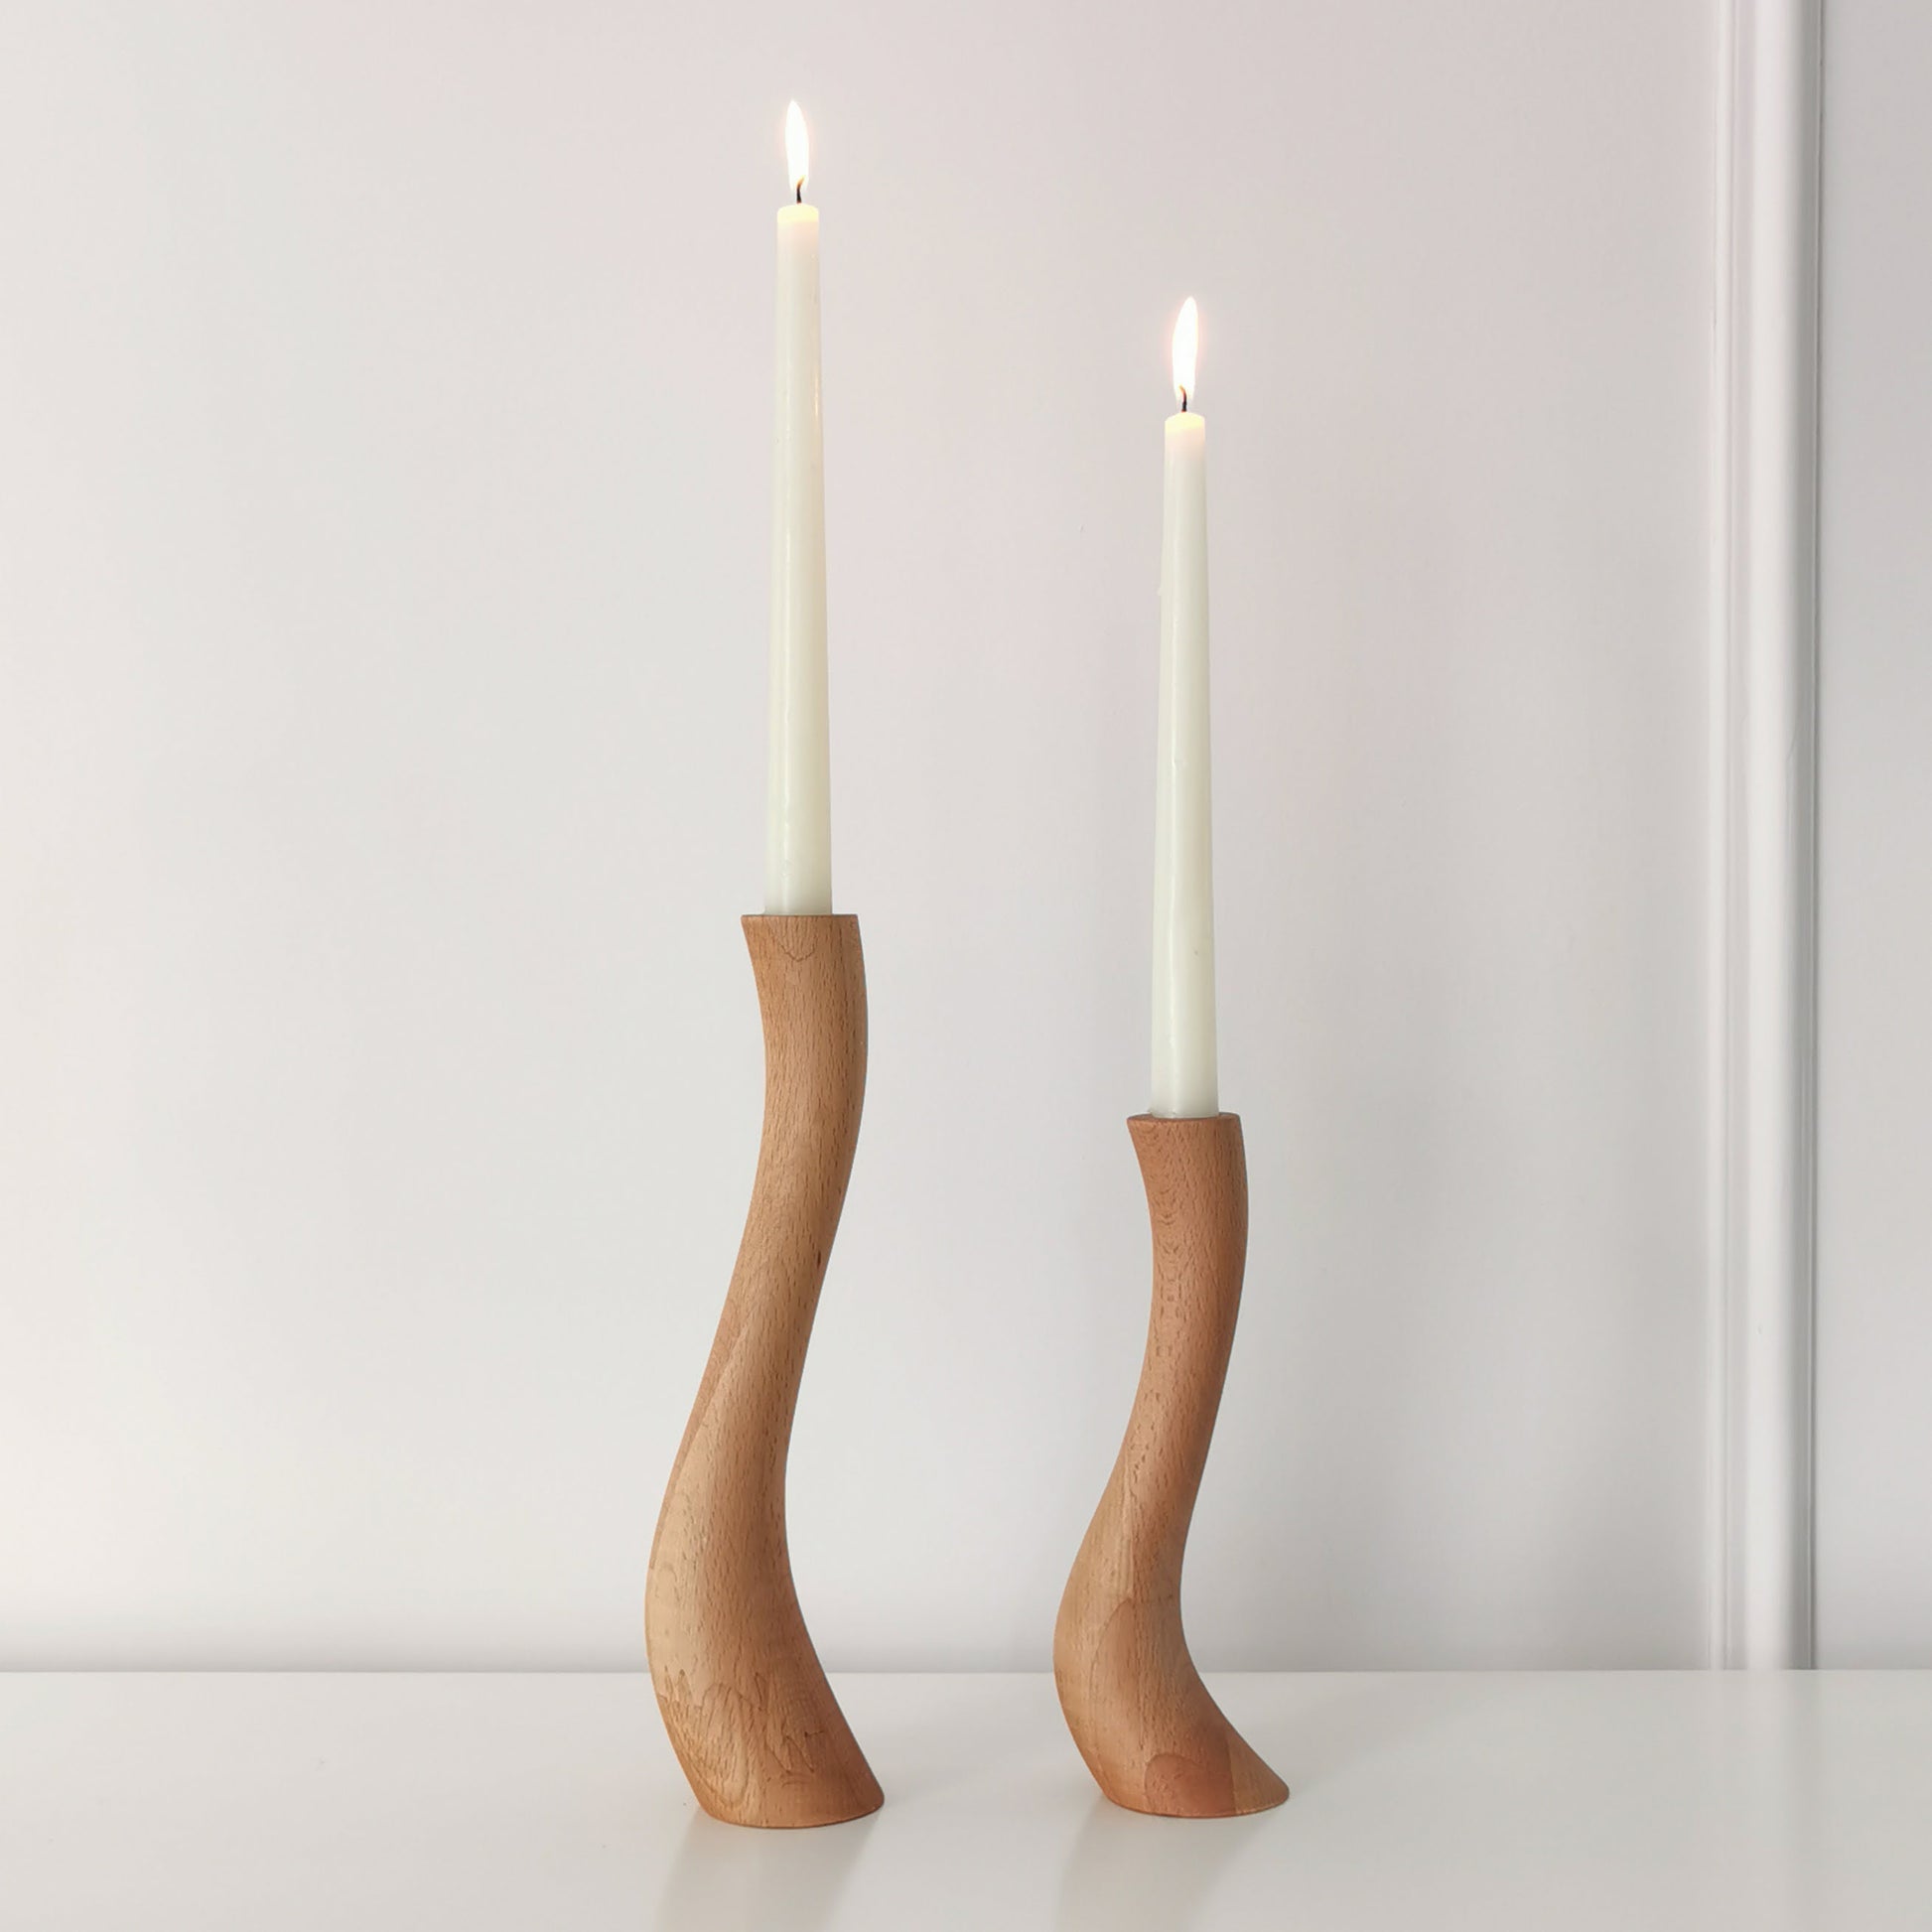 Wooden Candle Holder Decor For Home Decoration Pillar Candle Holder Wood Candle  Sticks Holder Decor Tapered